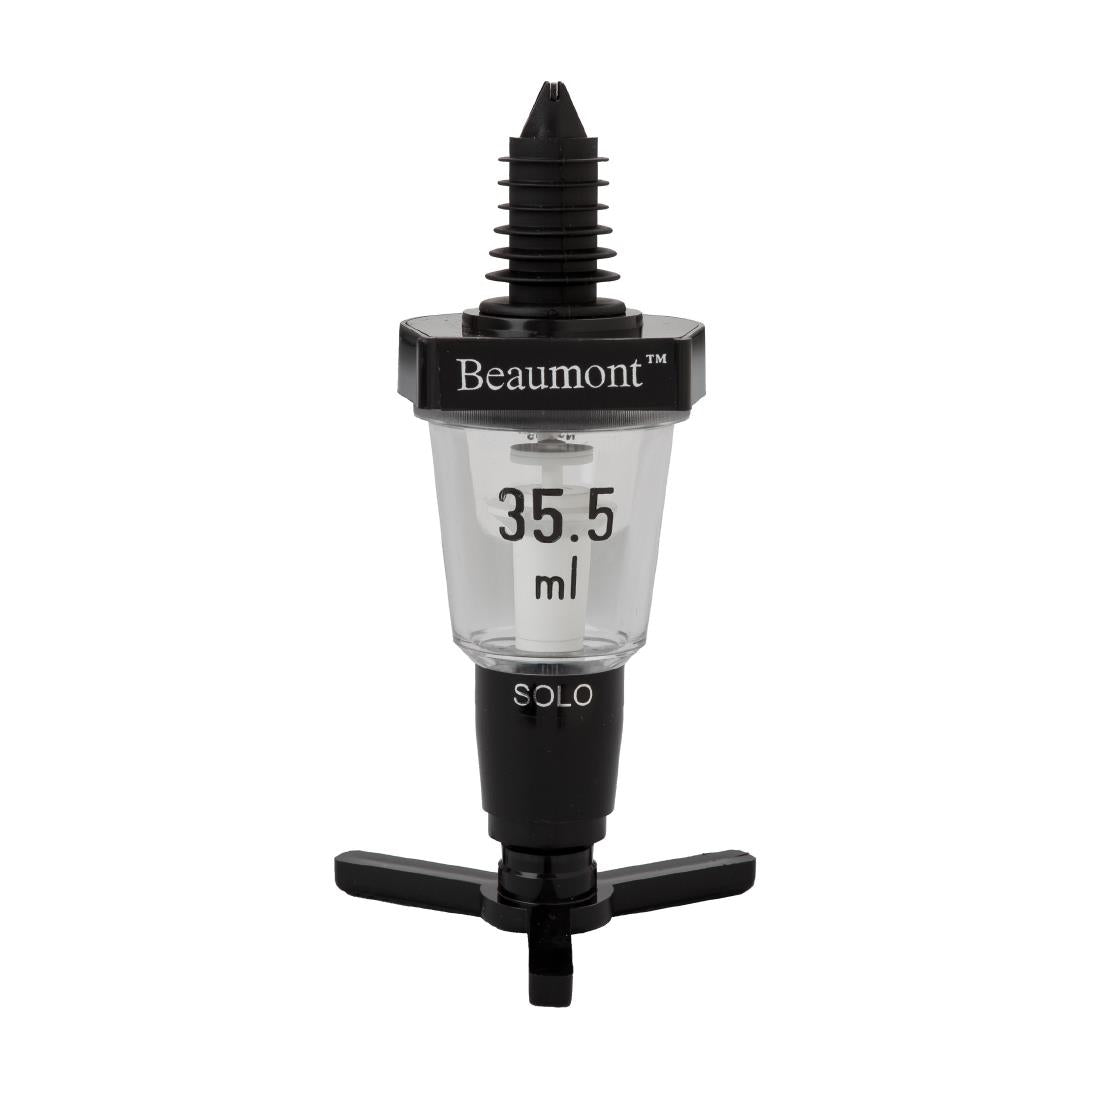 CZ334 Beaumont Black Solo Measure Unstamped 35.5ml JD Catering Equipment Solutions Ltd